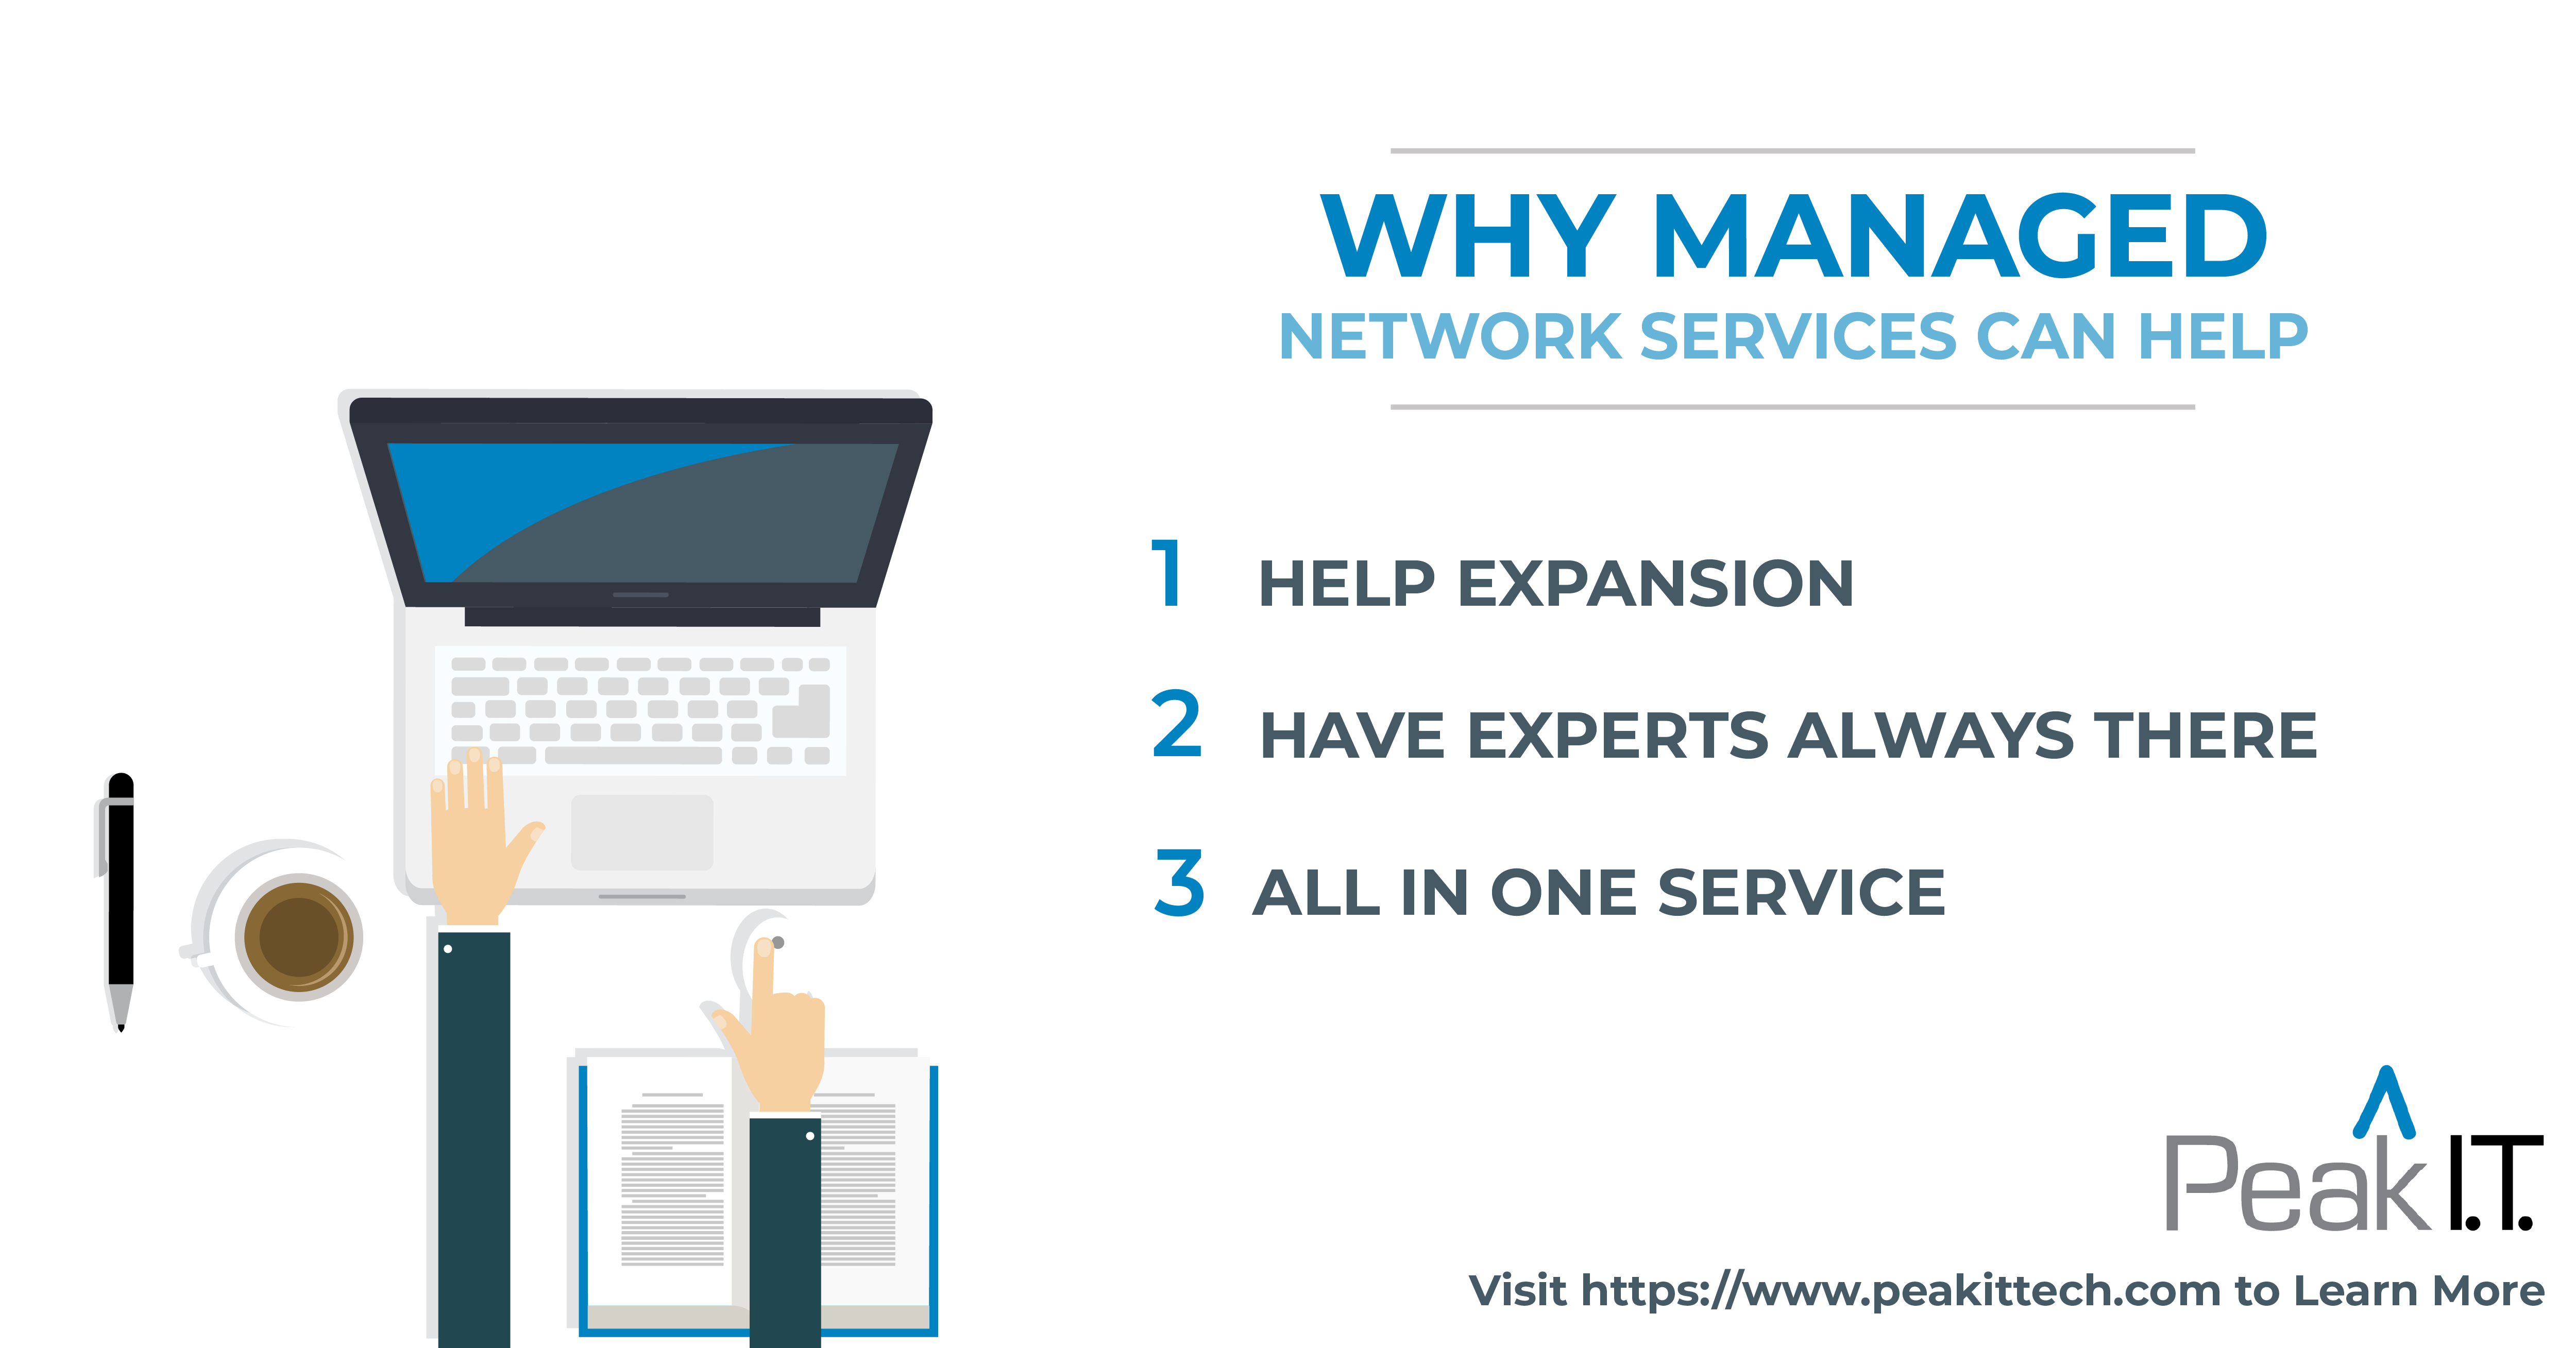 Why Managed Network Services Can Help